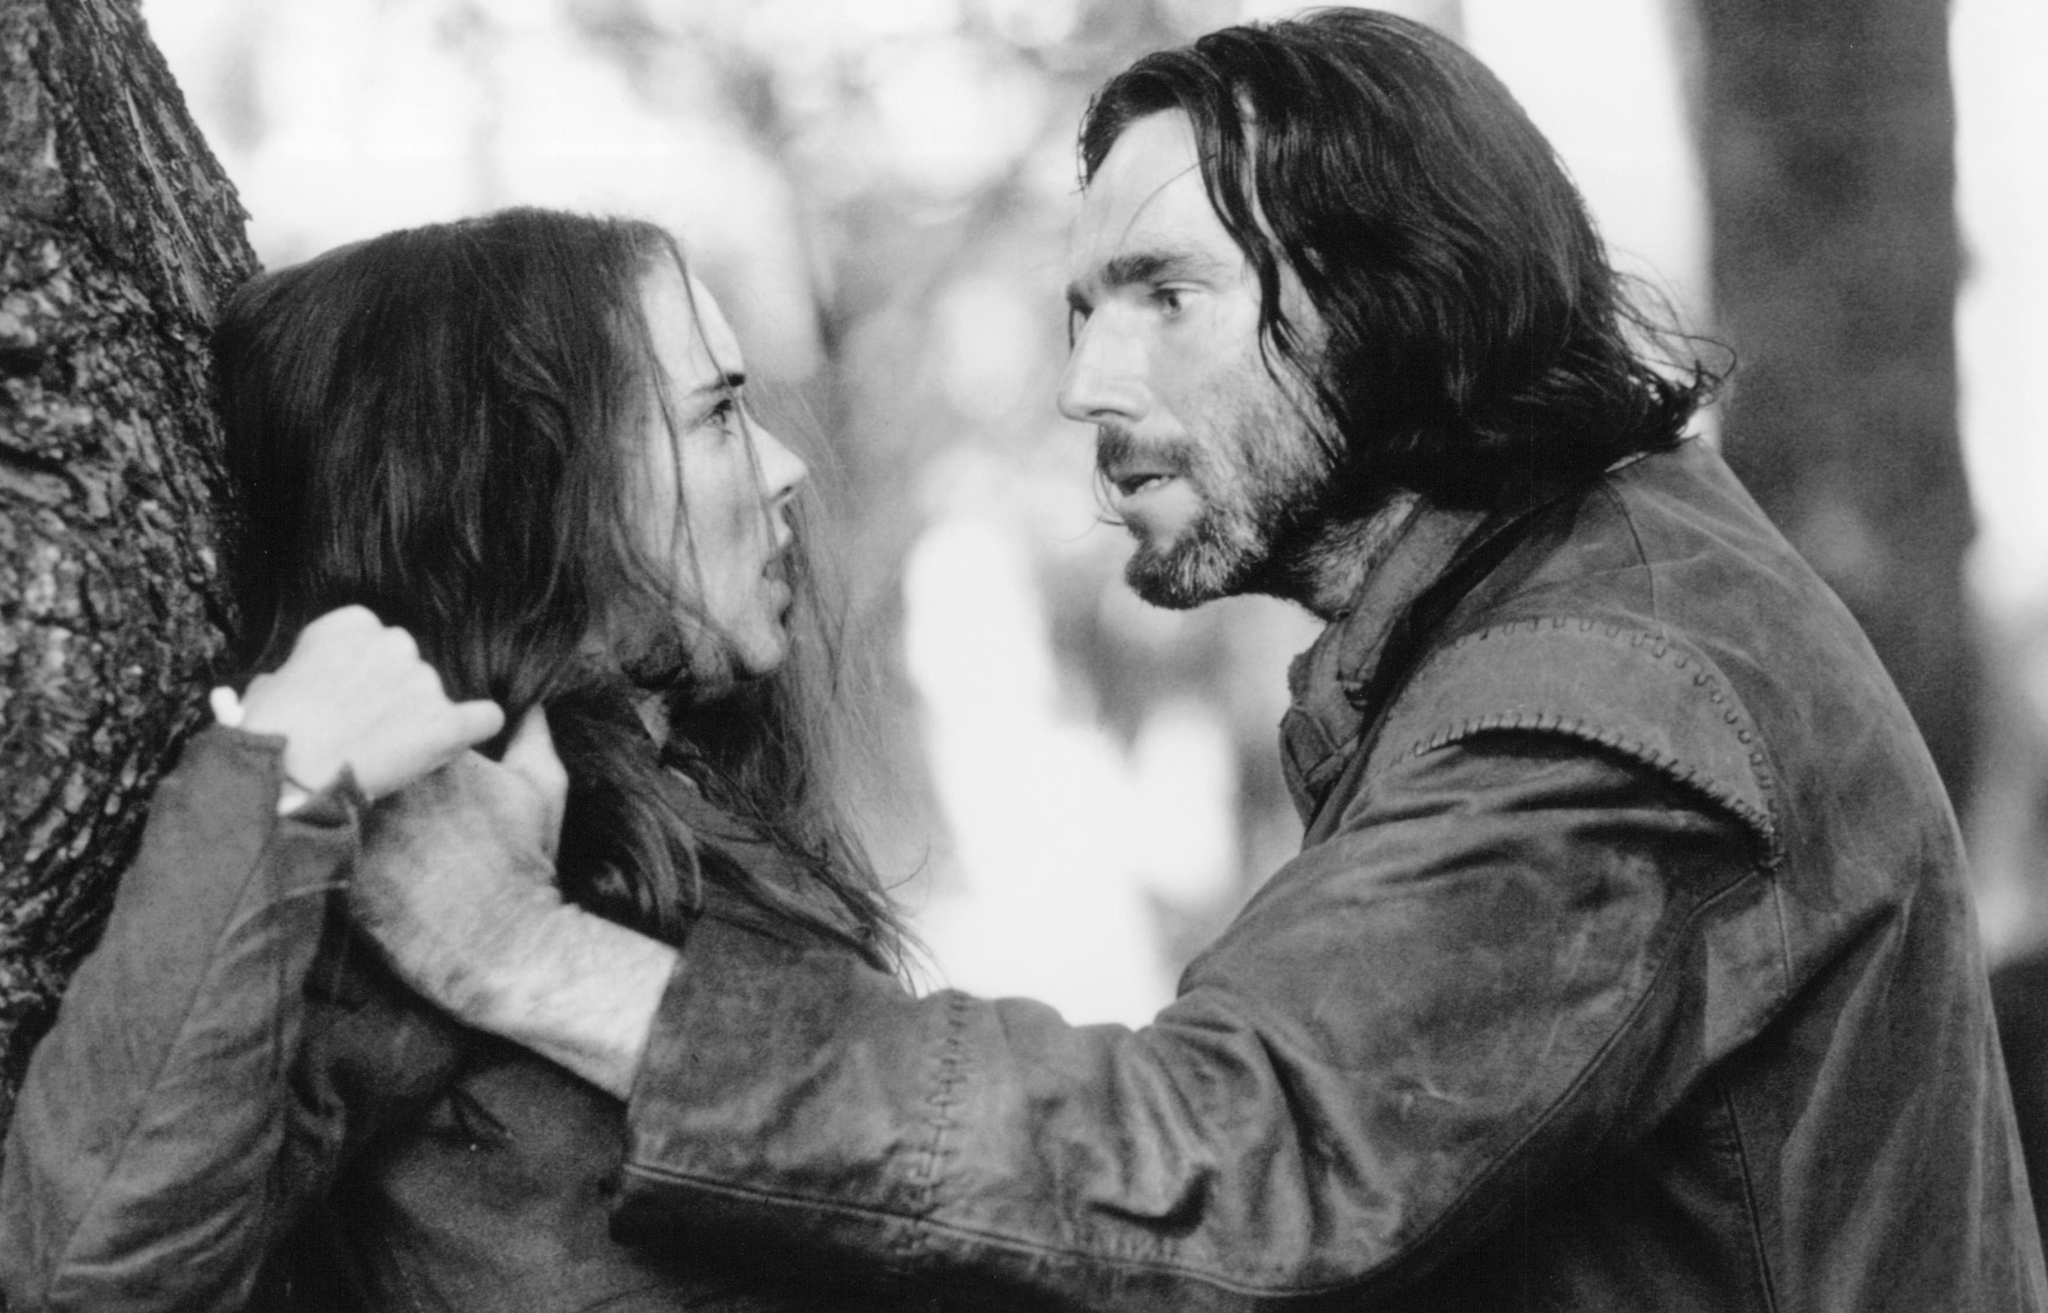 Still of Winona Ryder and Daniel Day-Lewis in The Crucible (1996)